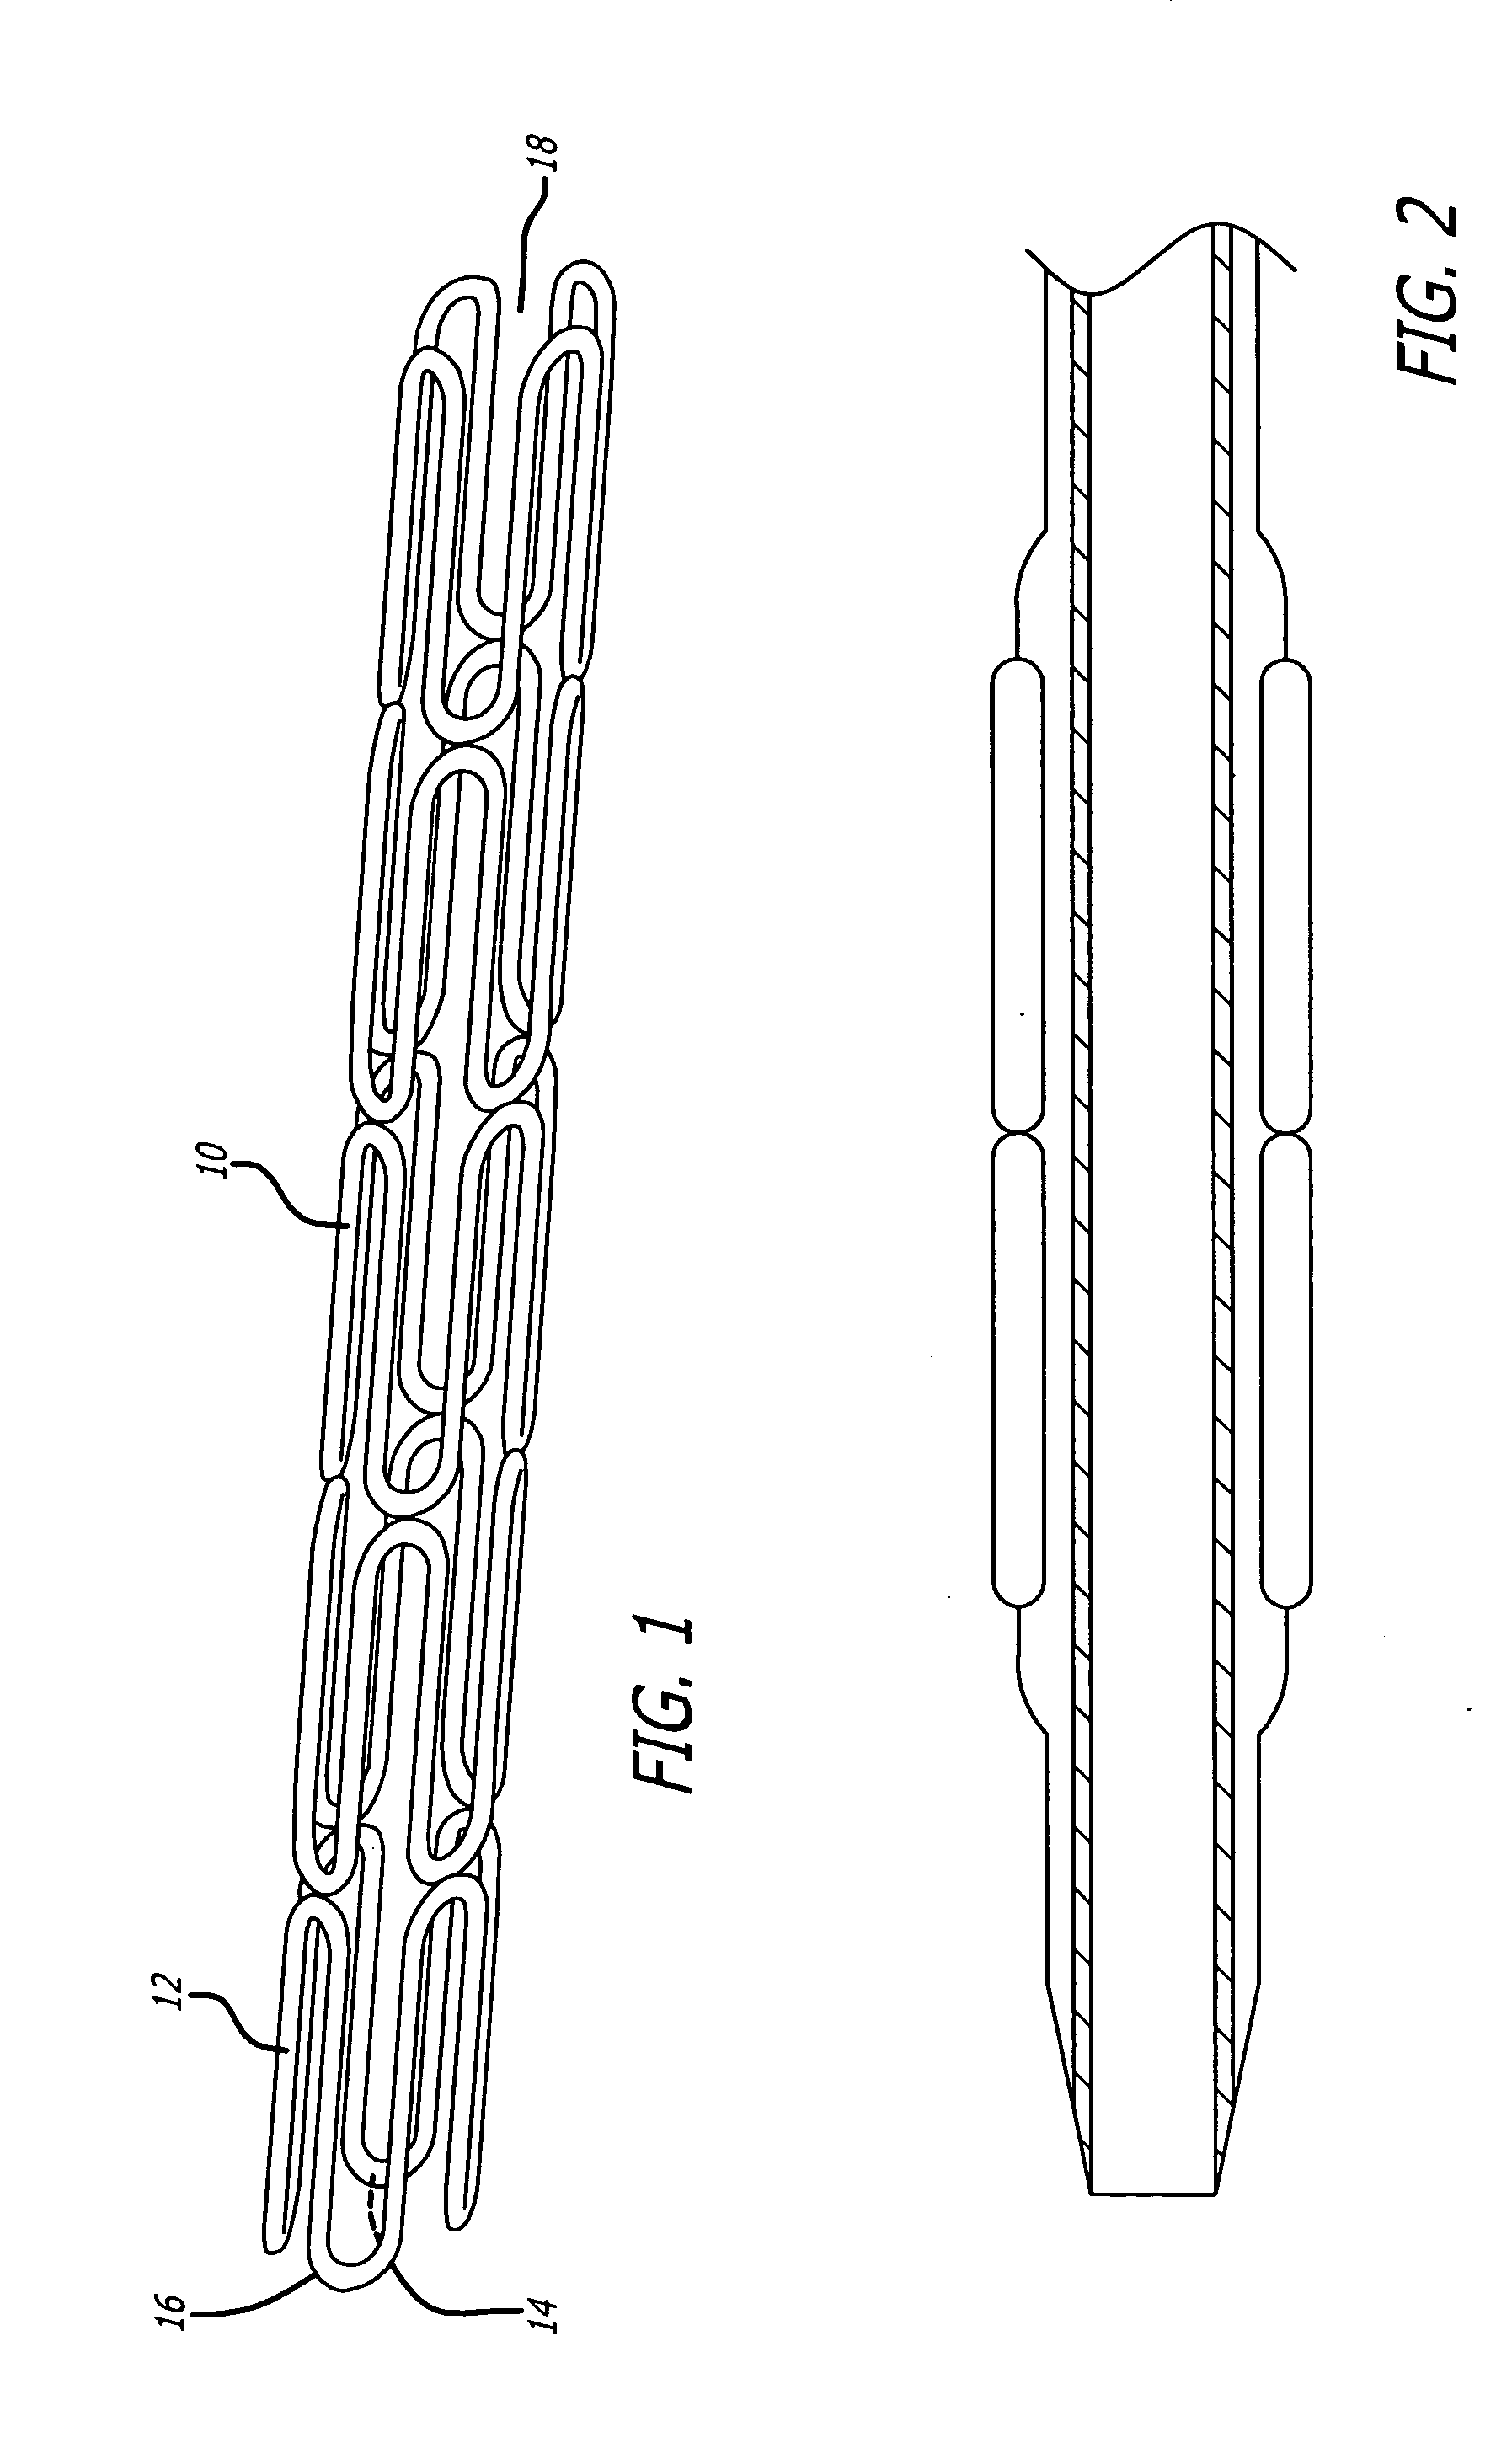 Medical devices and compositions for delivering biophosphonates to anatomical sites at risk for vascular disease